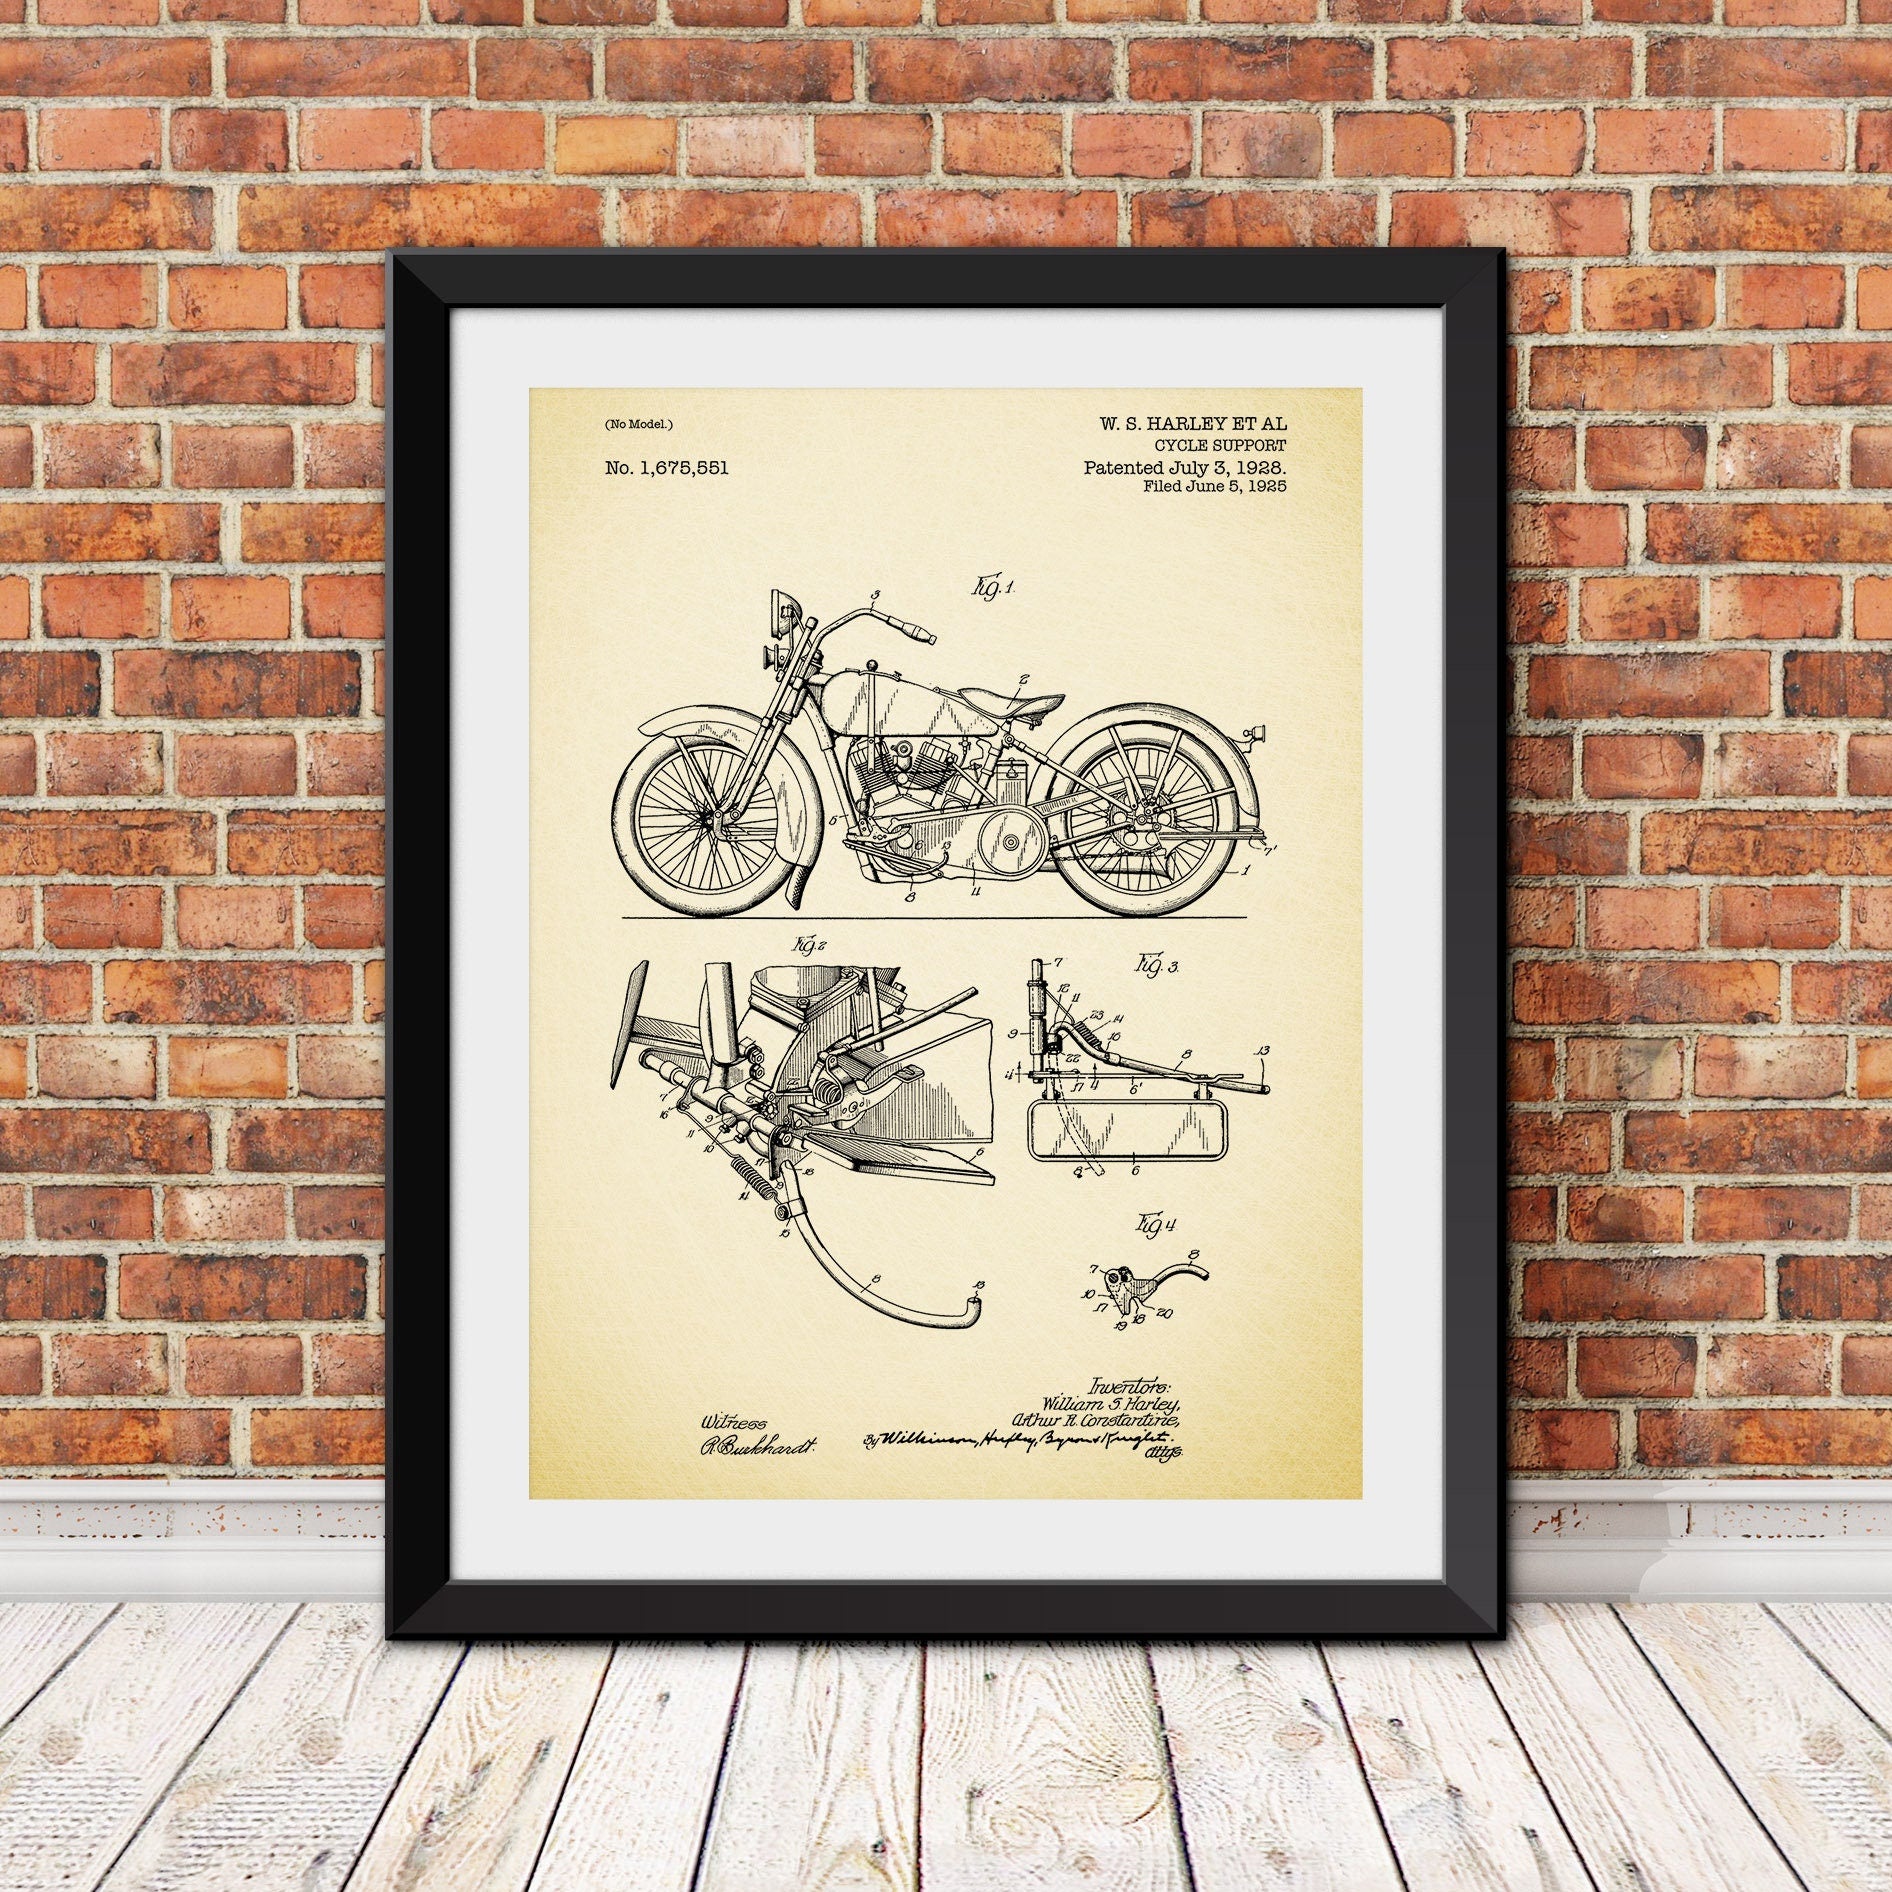 Harley Cycle Support Patent, Harley Davidson, Harley Print, Motorcycle Art, Harley Davidson Art, Vintage Harley Print, Motorcycle Print